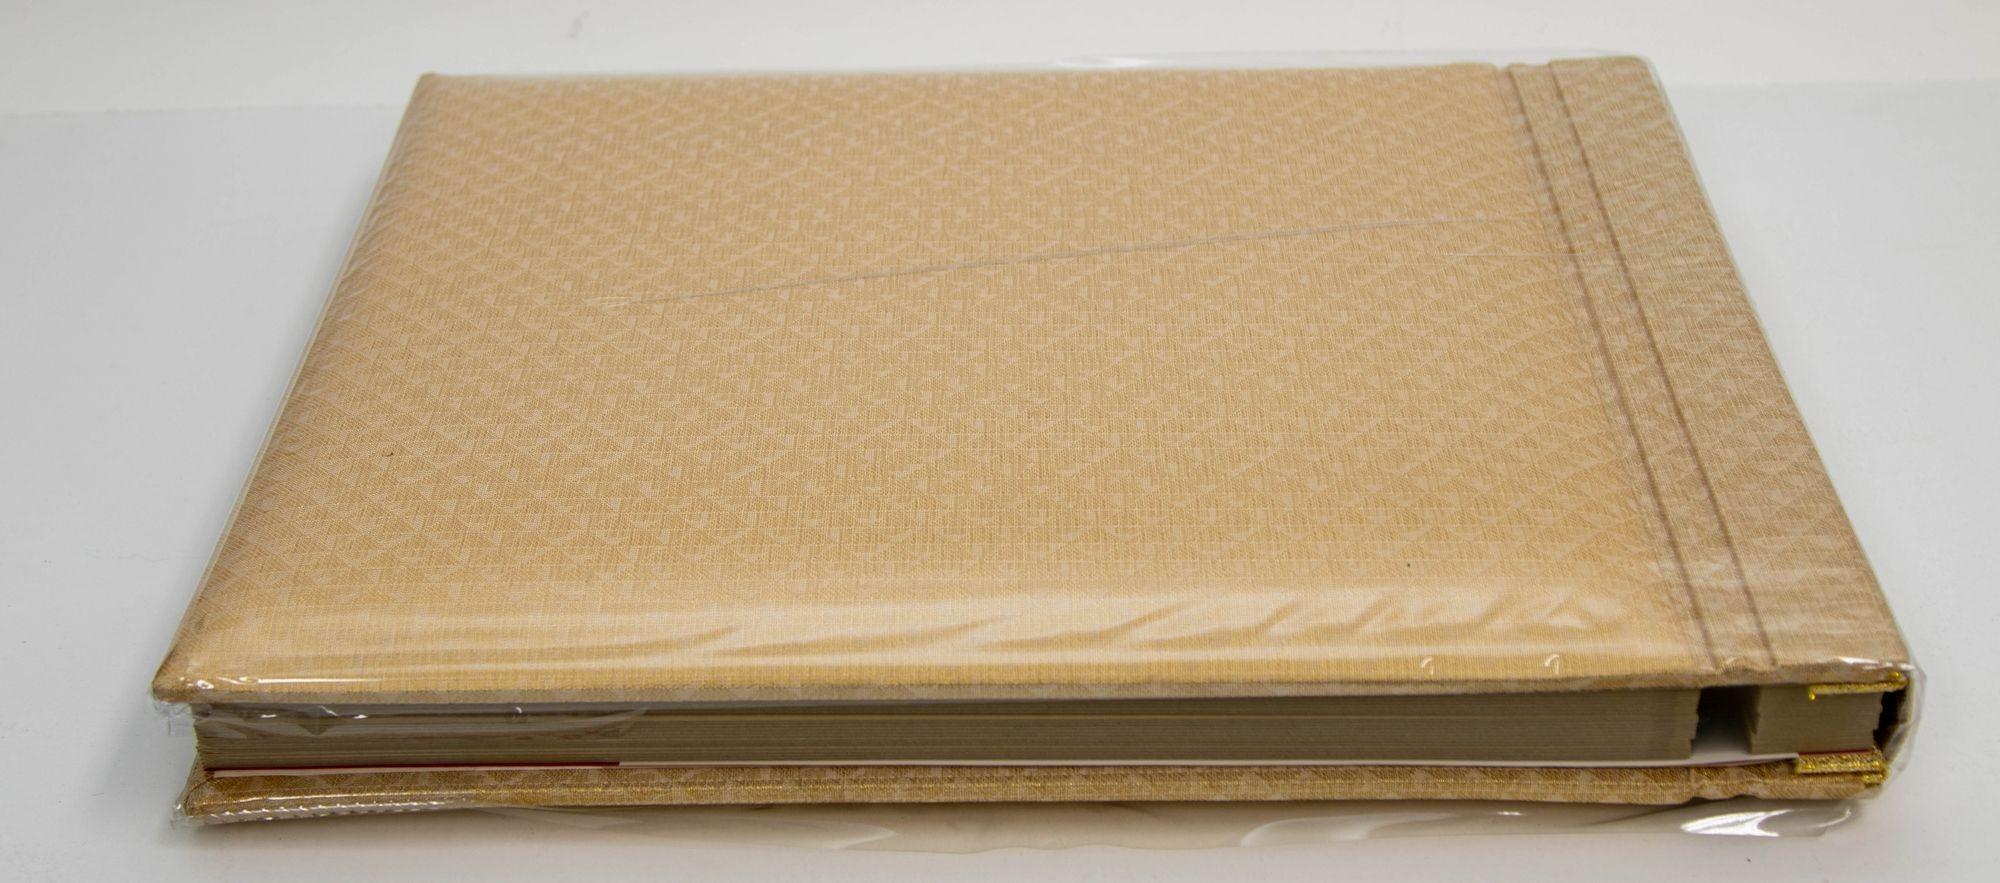 Vintage Japanese Gold Silk Embroidery Wedding Photo Album in Box In Good Condition For Sale In North Hollywood, CA